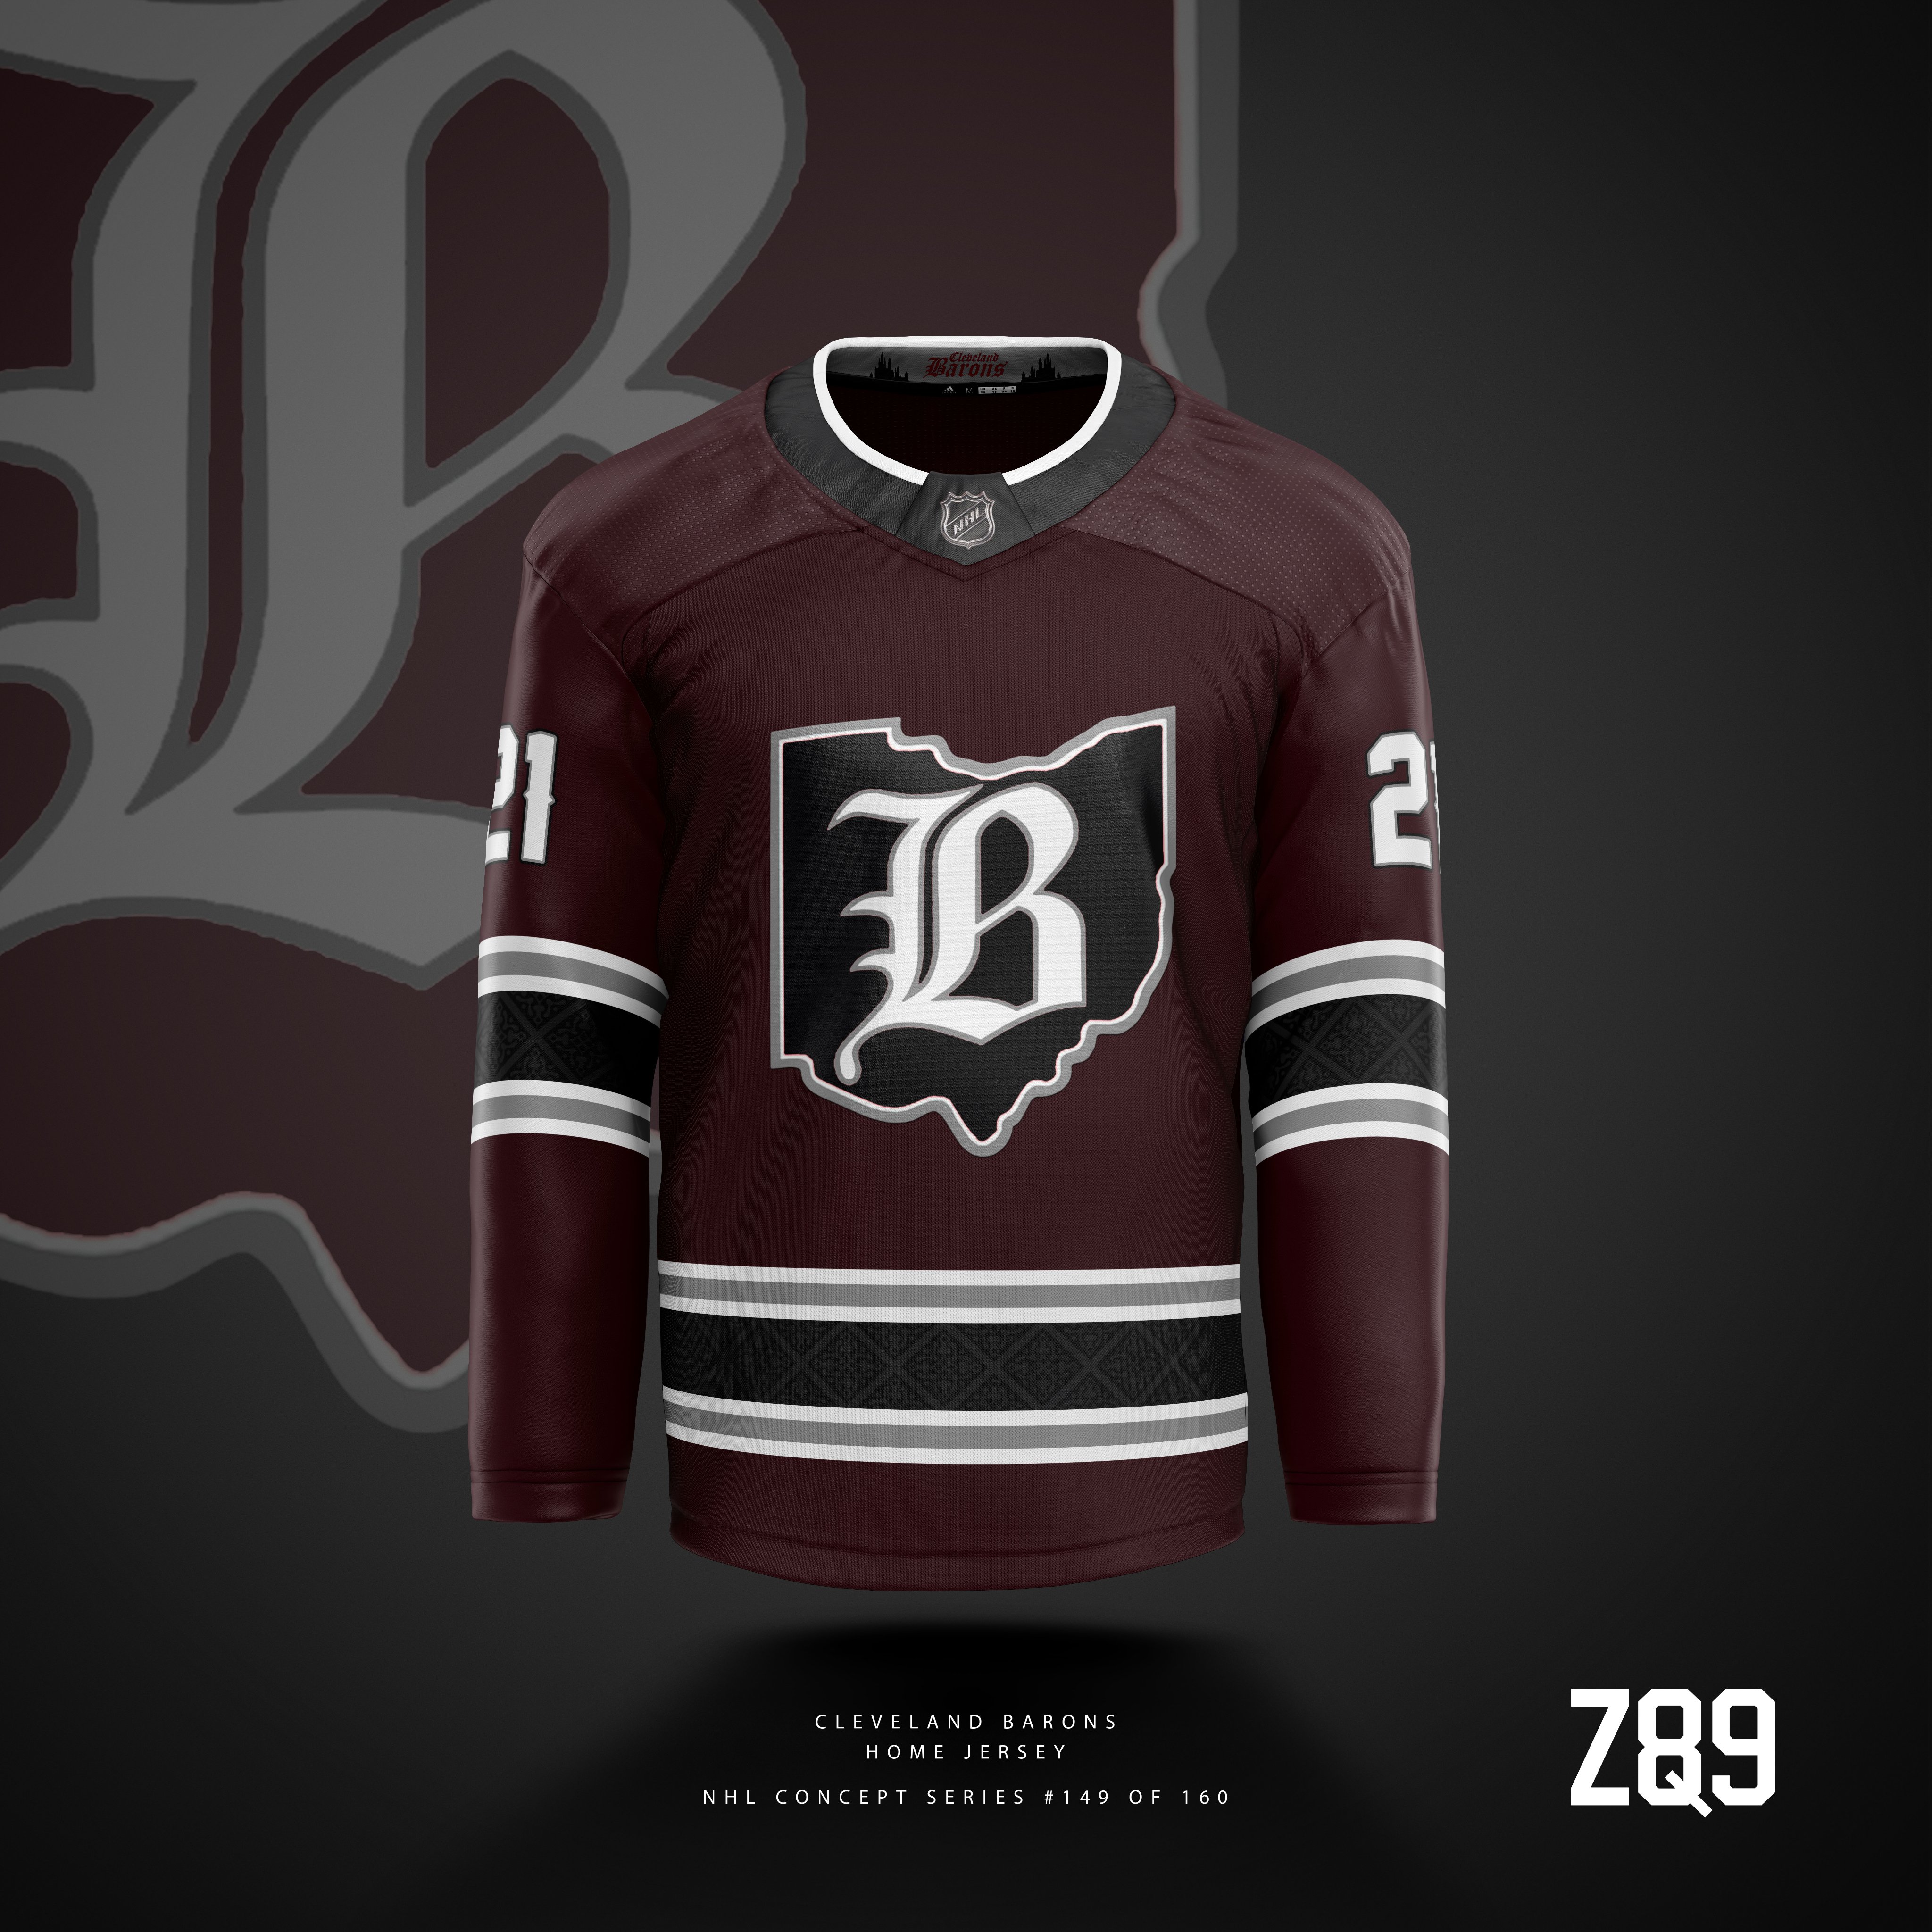 Z89Design on X: Cleveland Barons concepts! Always liked their